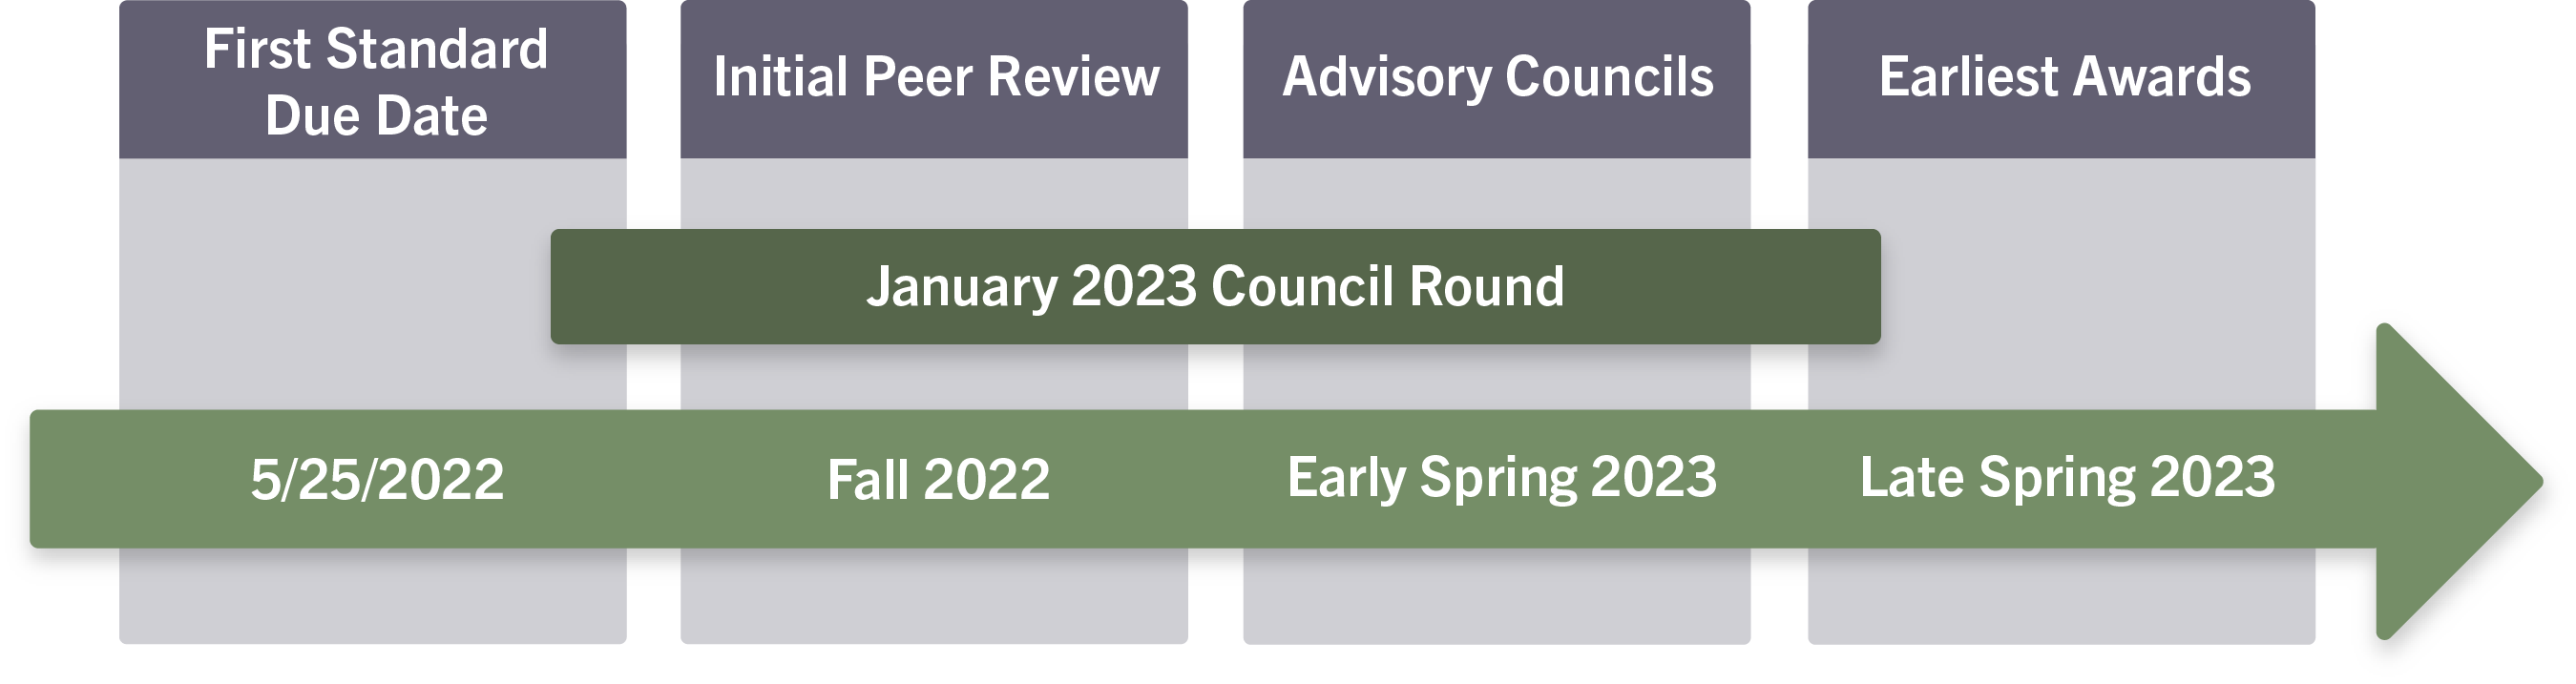 process flow for January 2023 Council Round - First Standard due date 5/25/2022, initial peer review Fall 2022, Advisory councils early Spring 2023, earliest awards late Spring 2023.